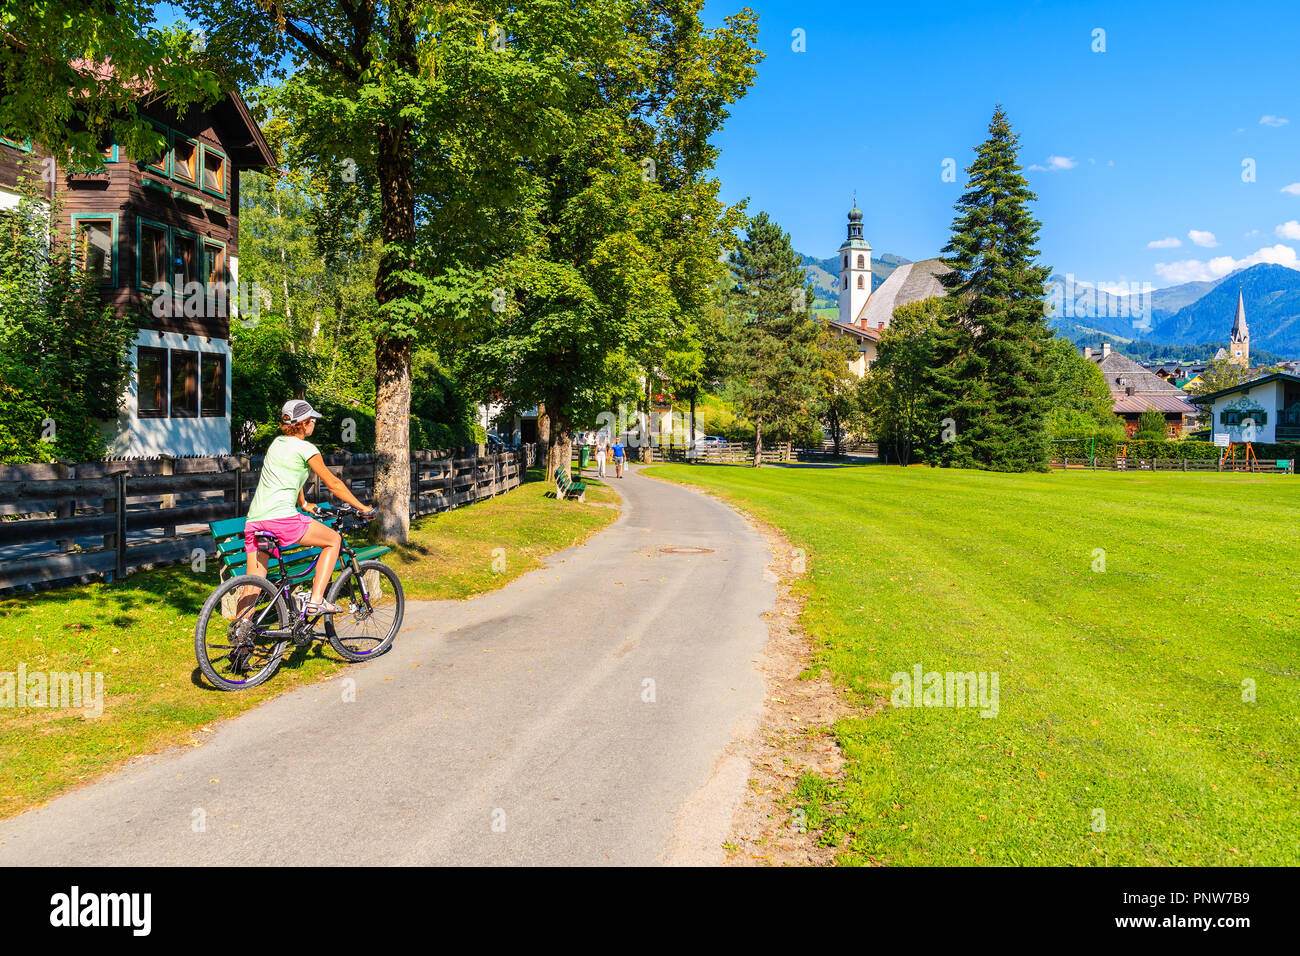 KITZBUHEL TOWN, AUSTRIA - JUL 30, 2018: Woman on bike on path in Kitzbuhel town park against sunny blue sky in summertime. It is one of the most famou Stock Photo